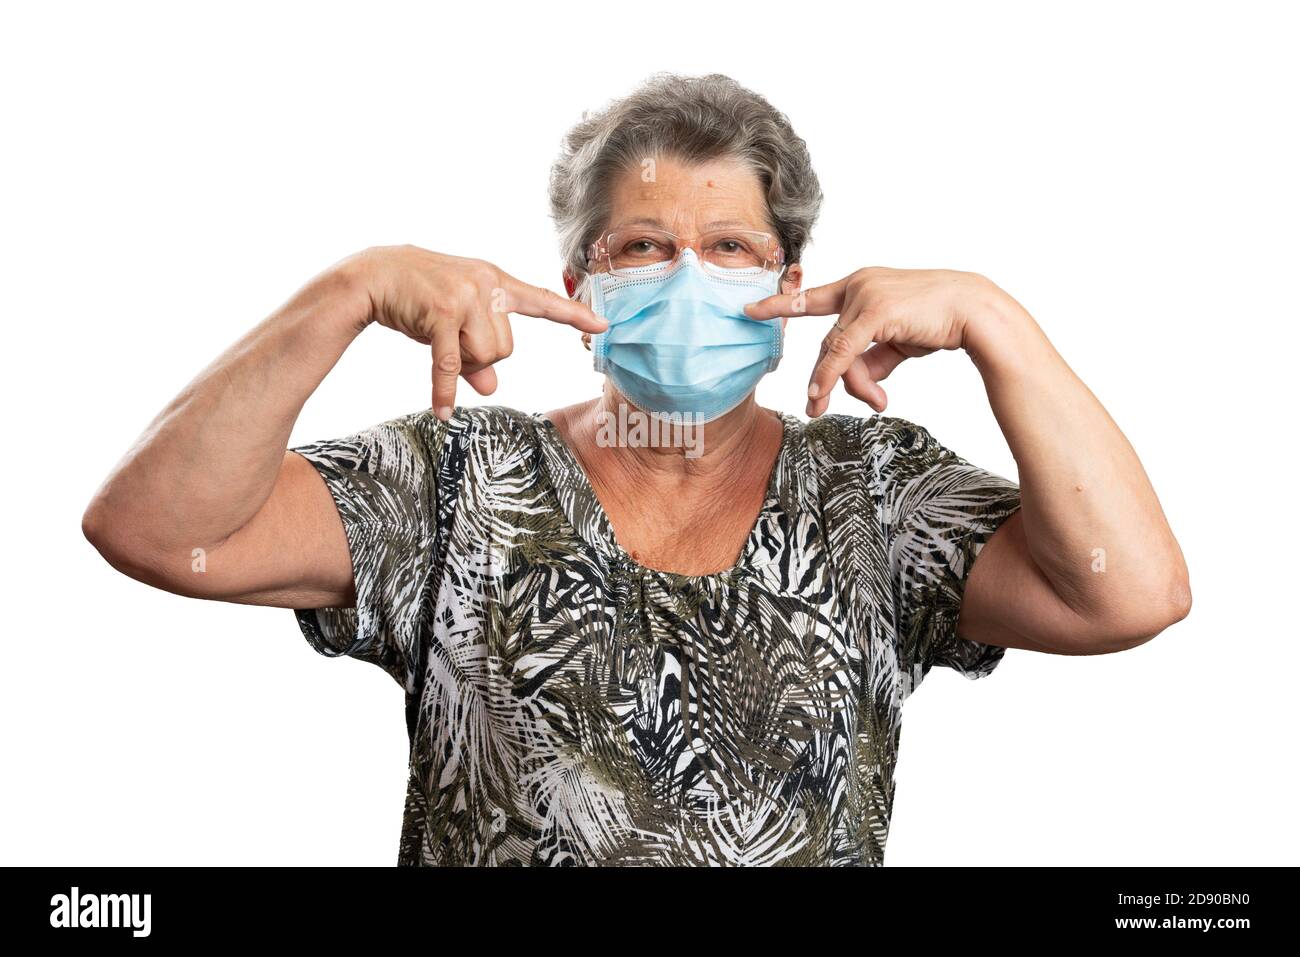 Old female person wearing glasses pointing index fingers at disposable sars covid19 virus medical or surgical protection mask as prevent pandemic conc Stock Photo